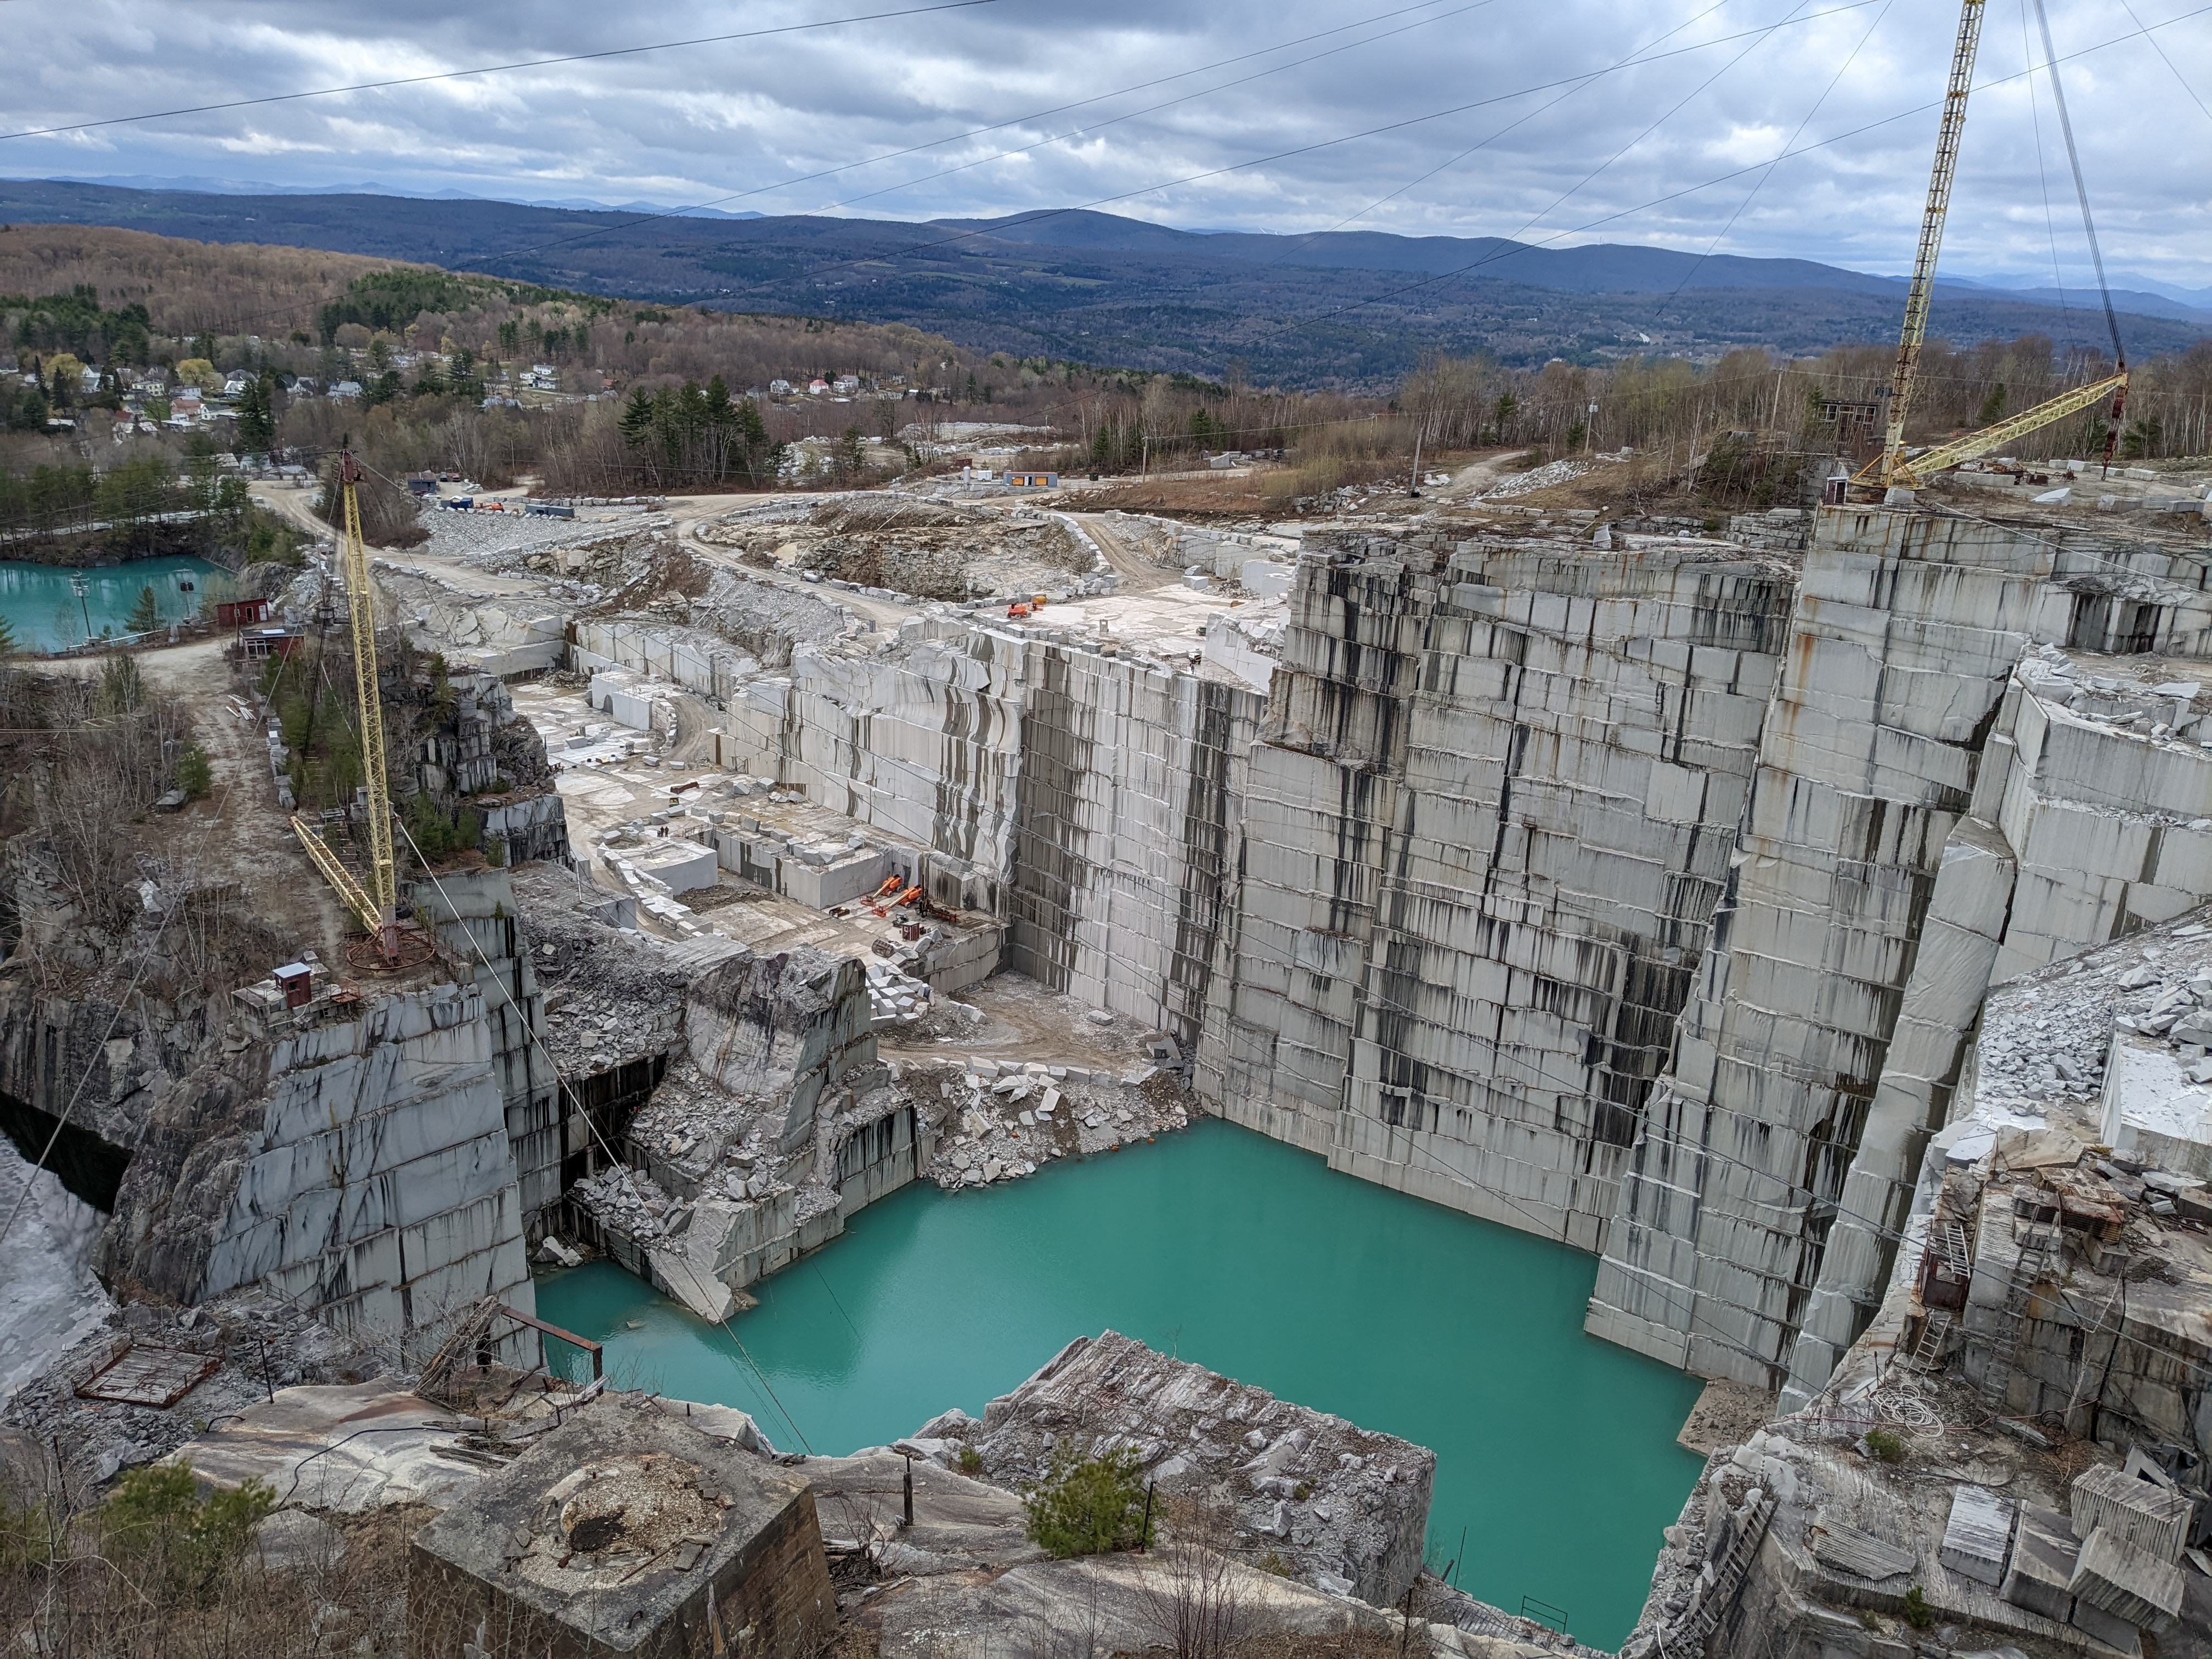 Smith Quarry near Rock of Ages Visitor Center.